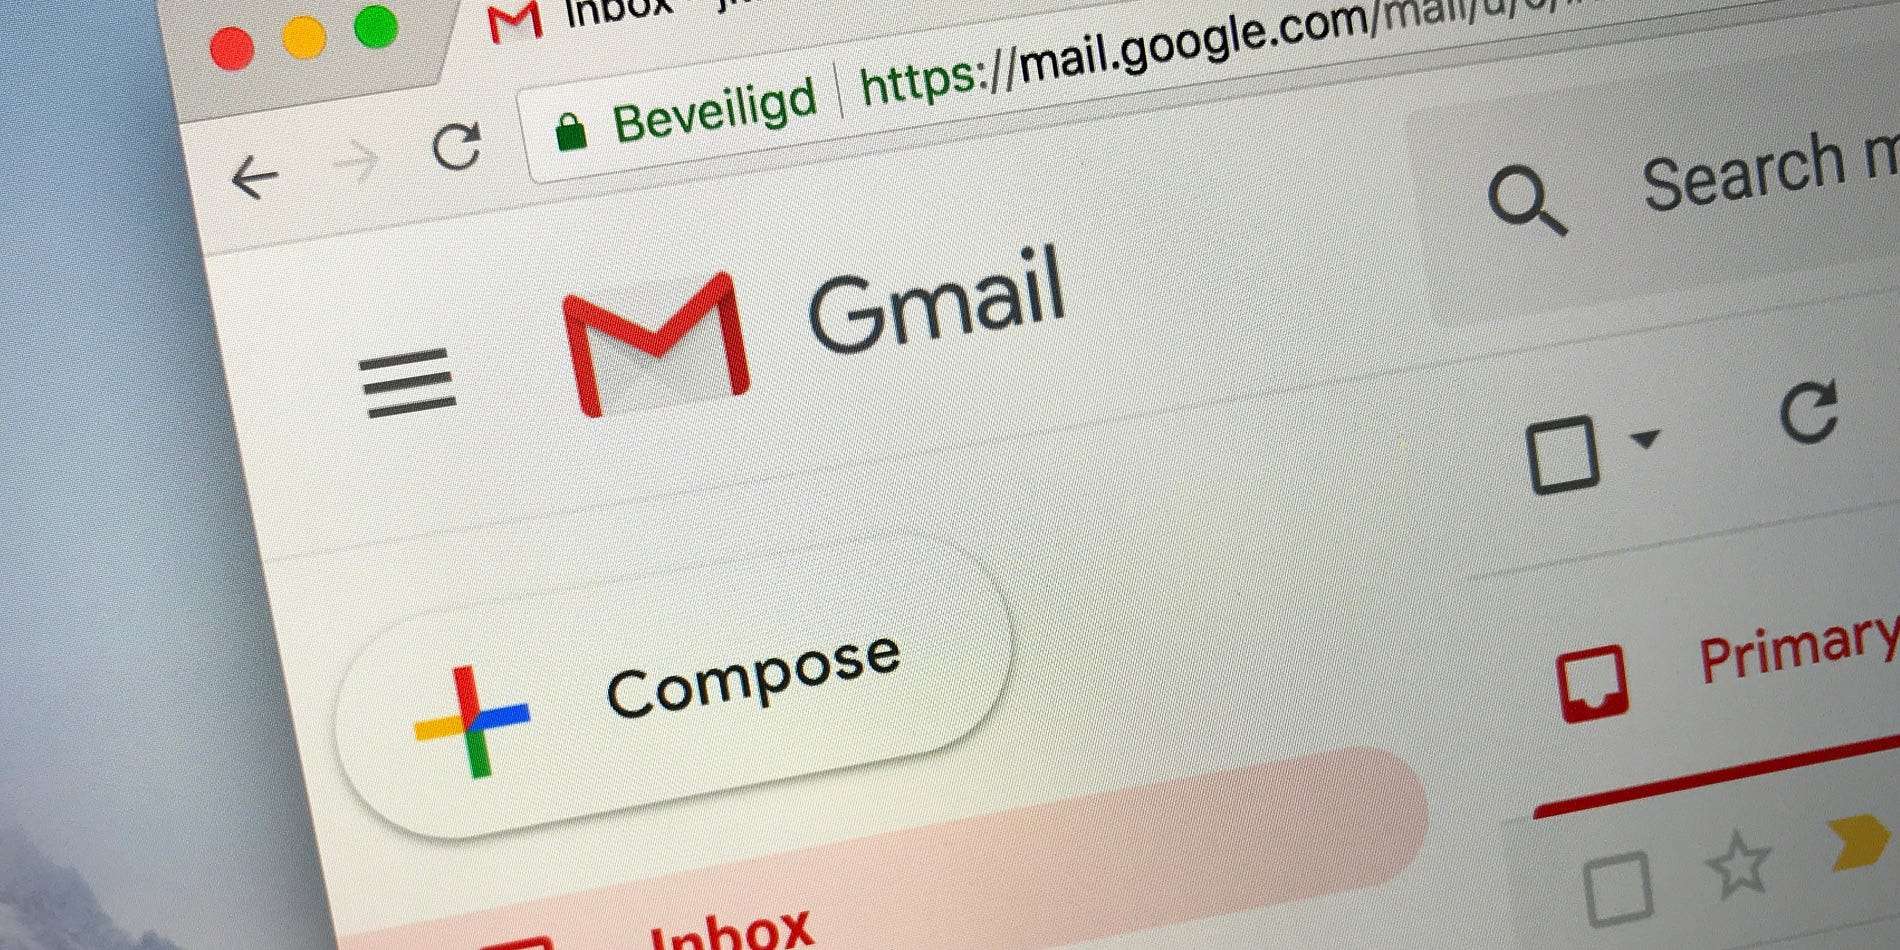 How to make Gmail display in dark mode on your computer, to reduce eye